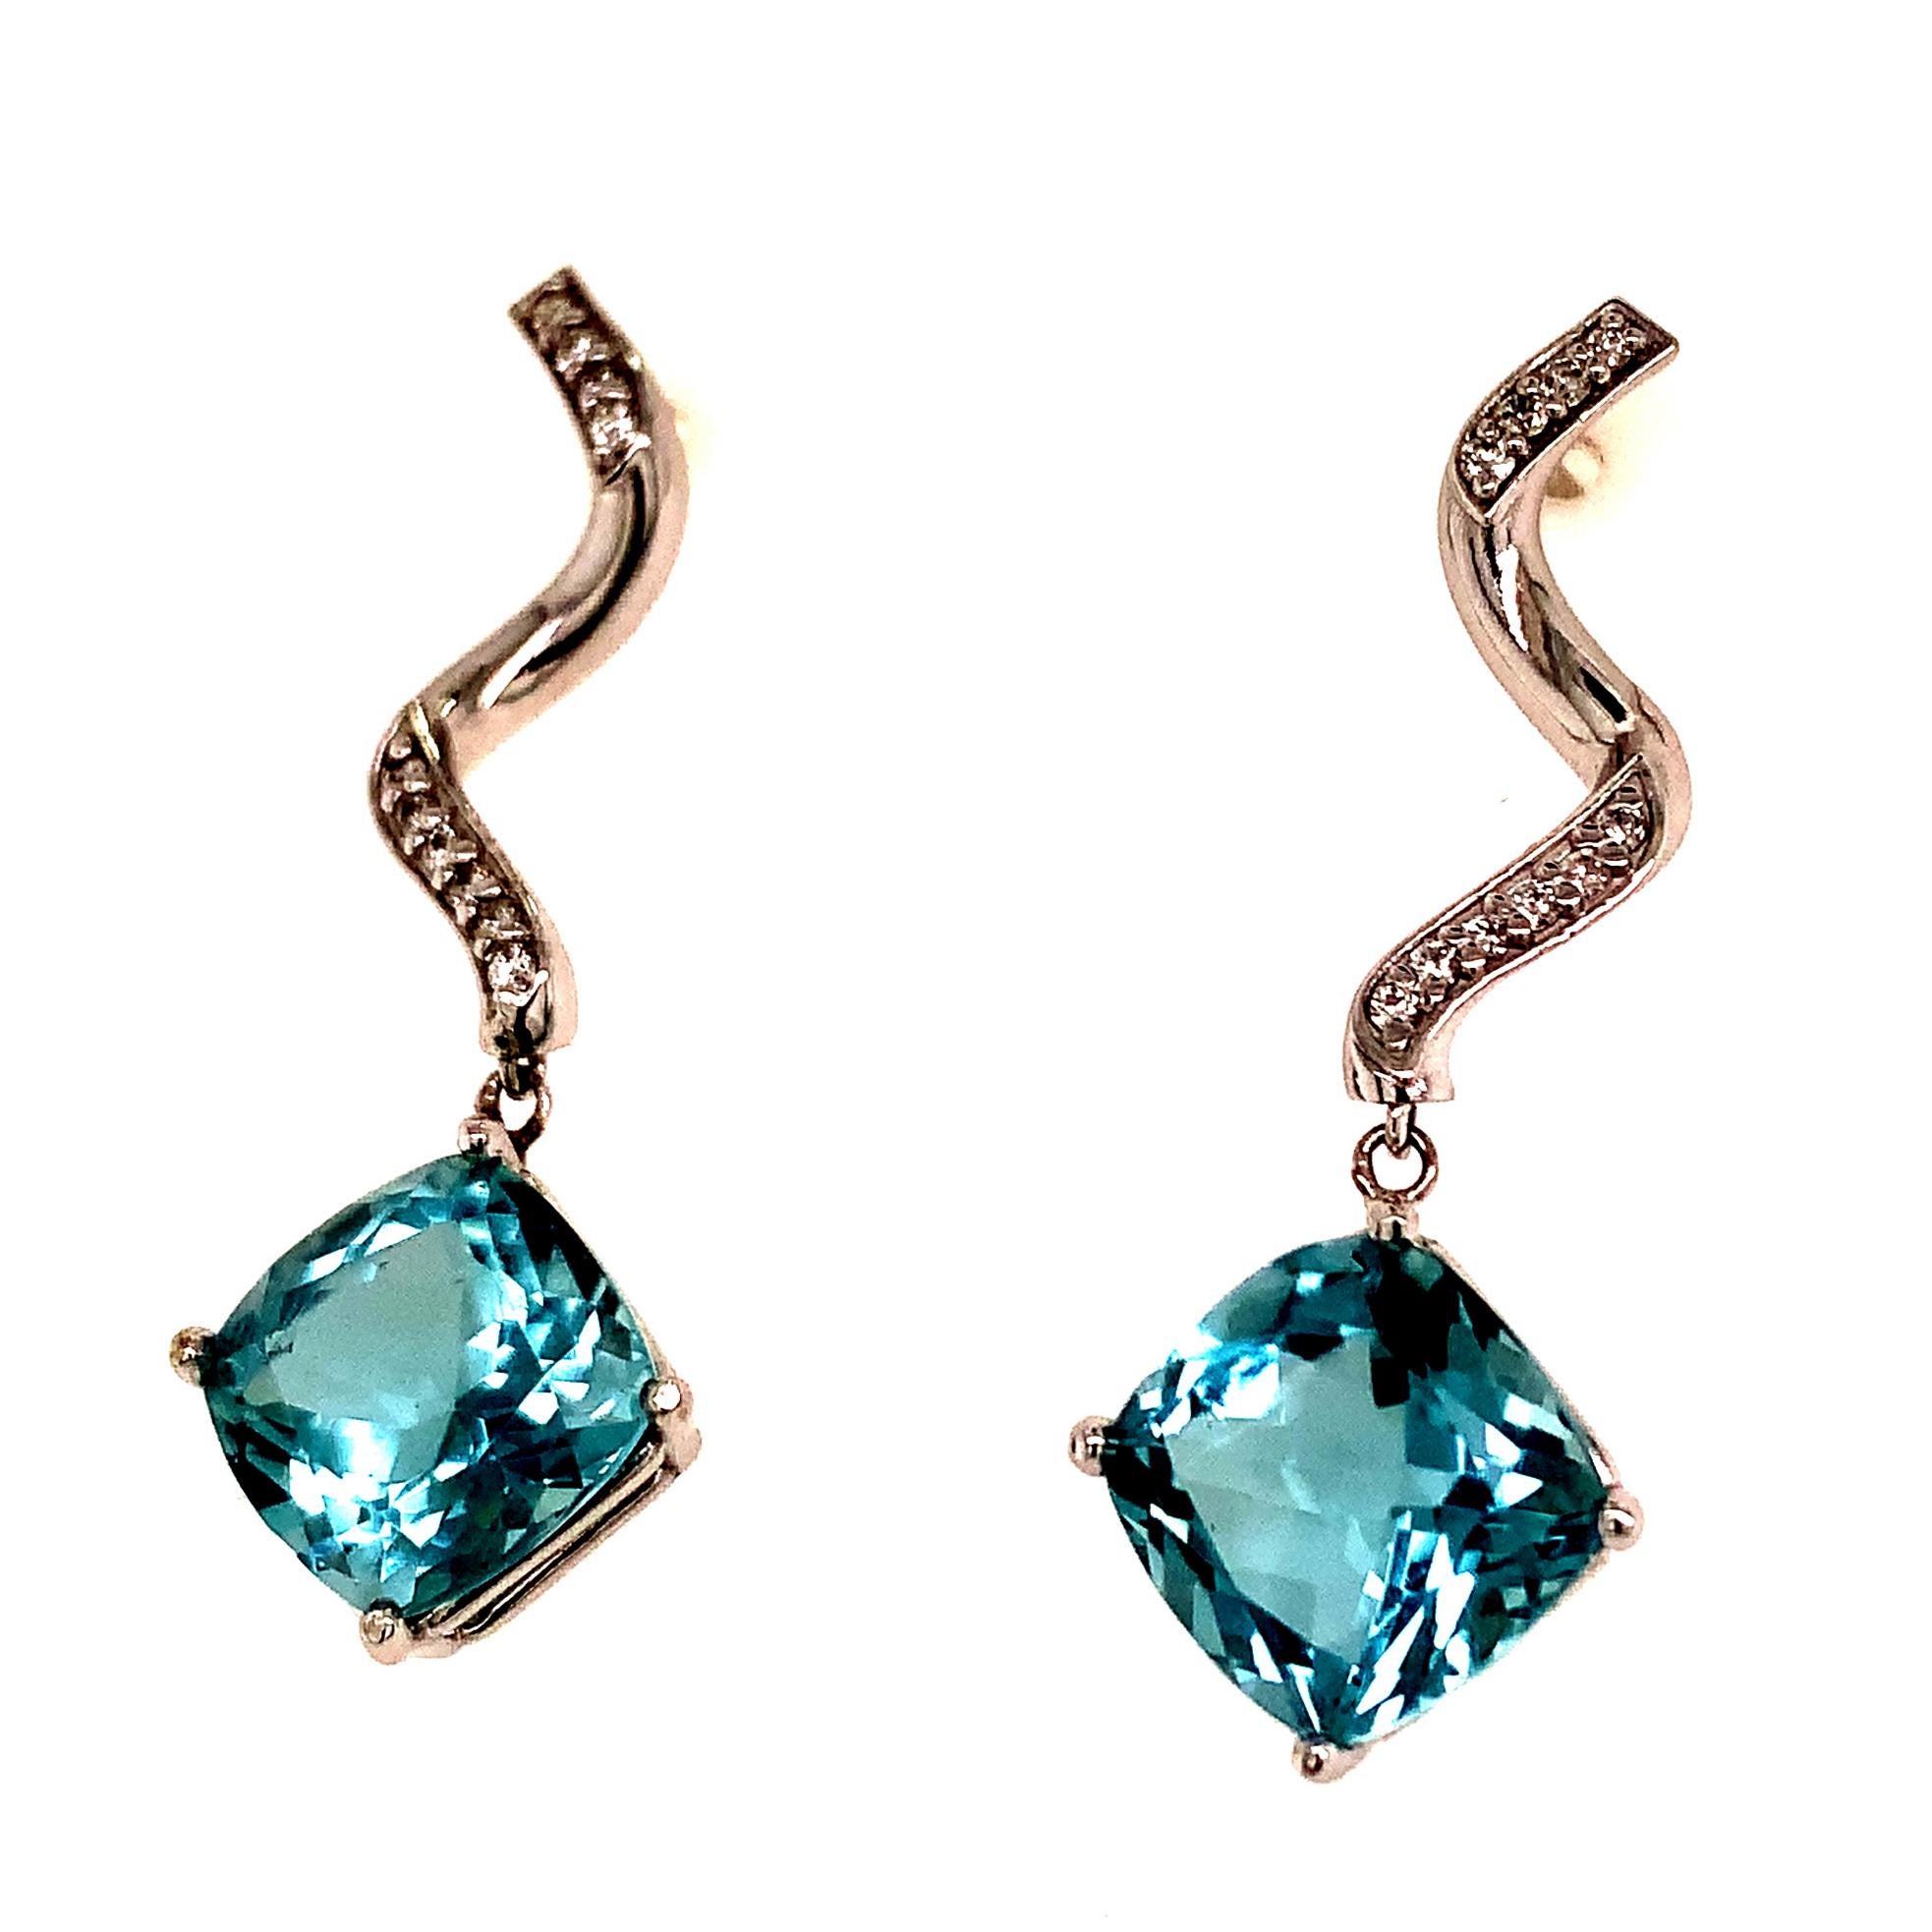 Natural Aquamarine Diamond Earrings 14k Gold 8.15 TCW Certified For Sale 6